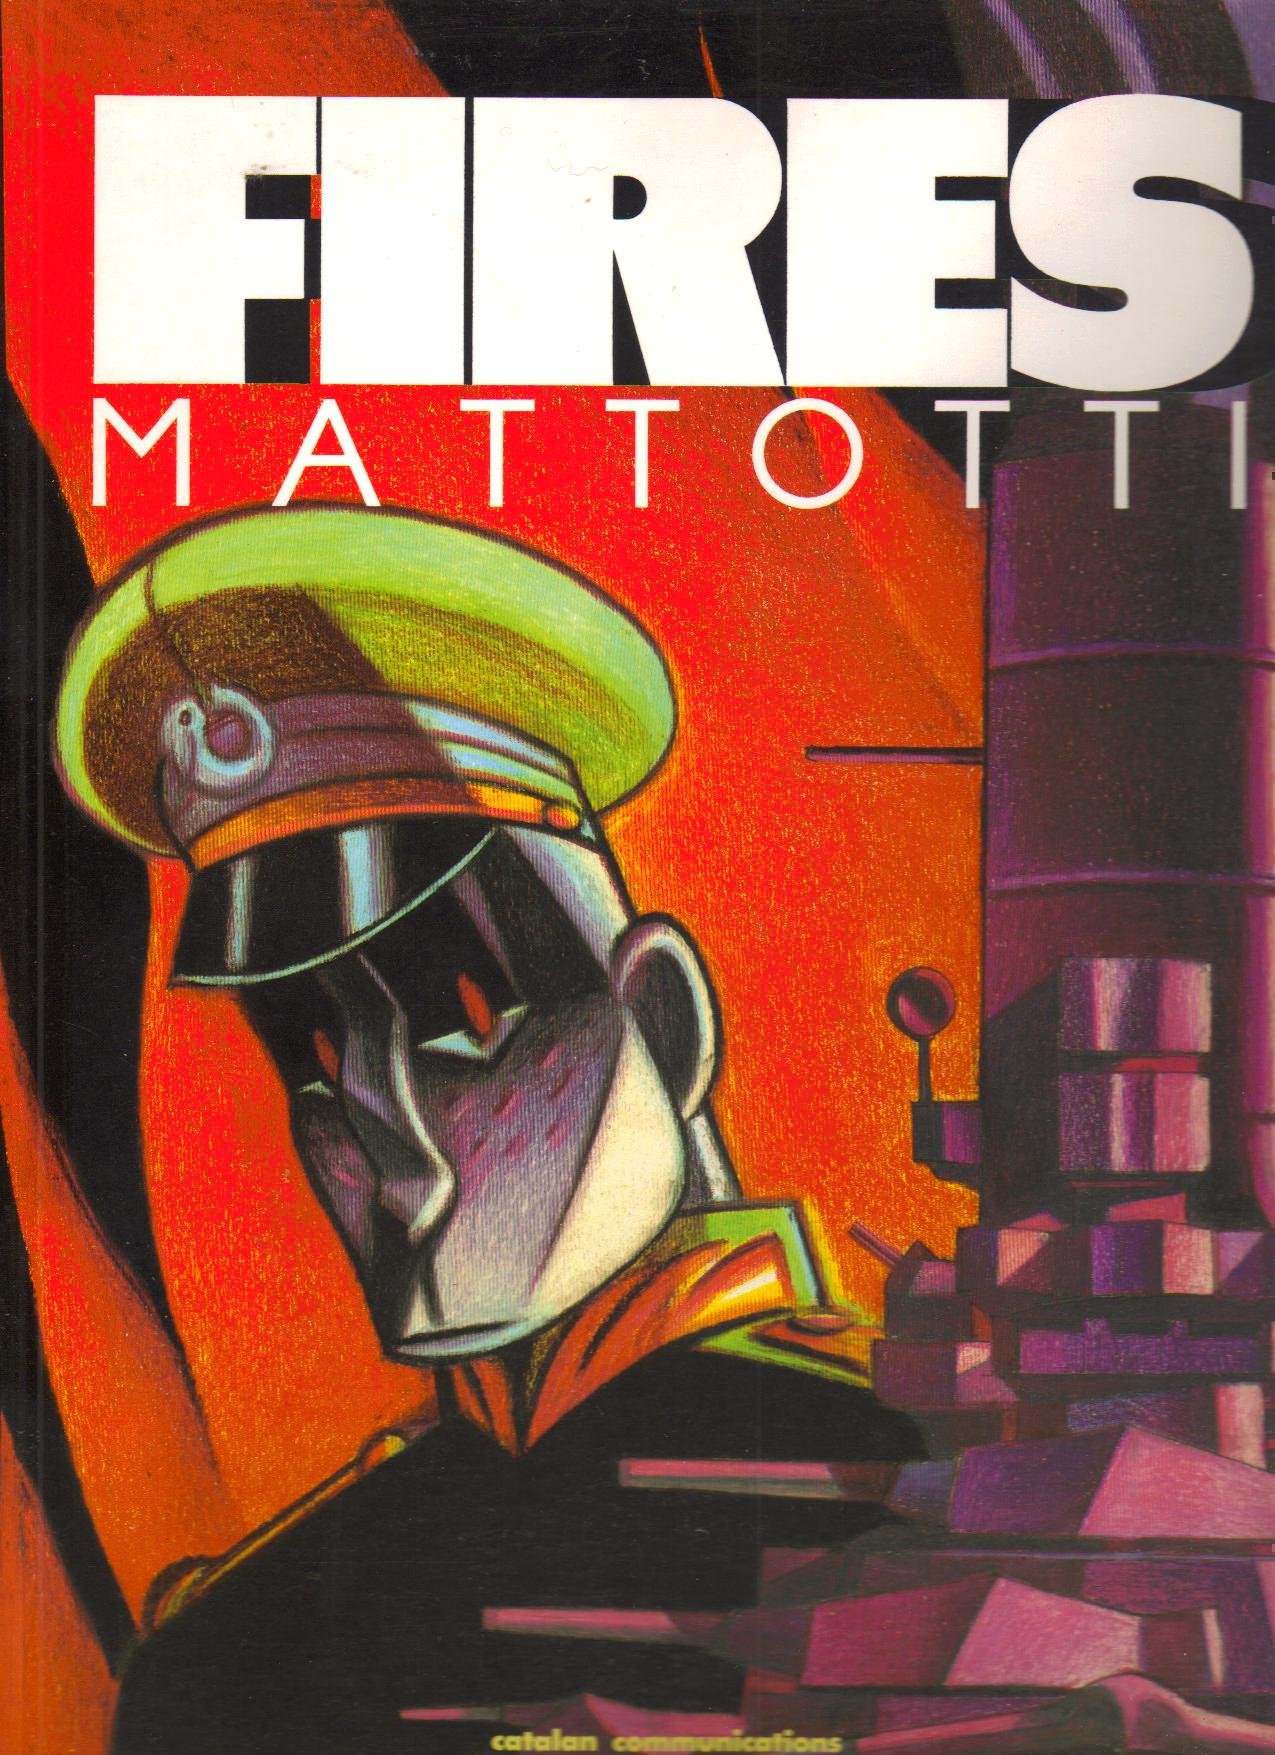 The cover of "Fires"